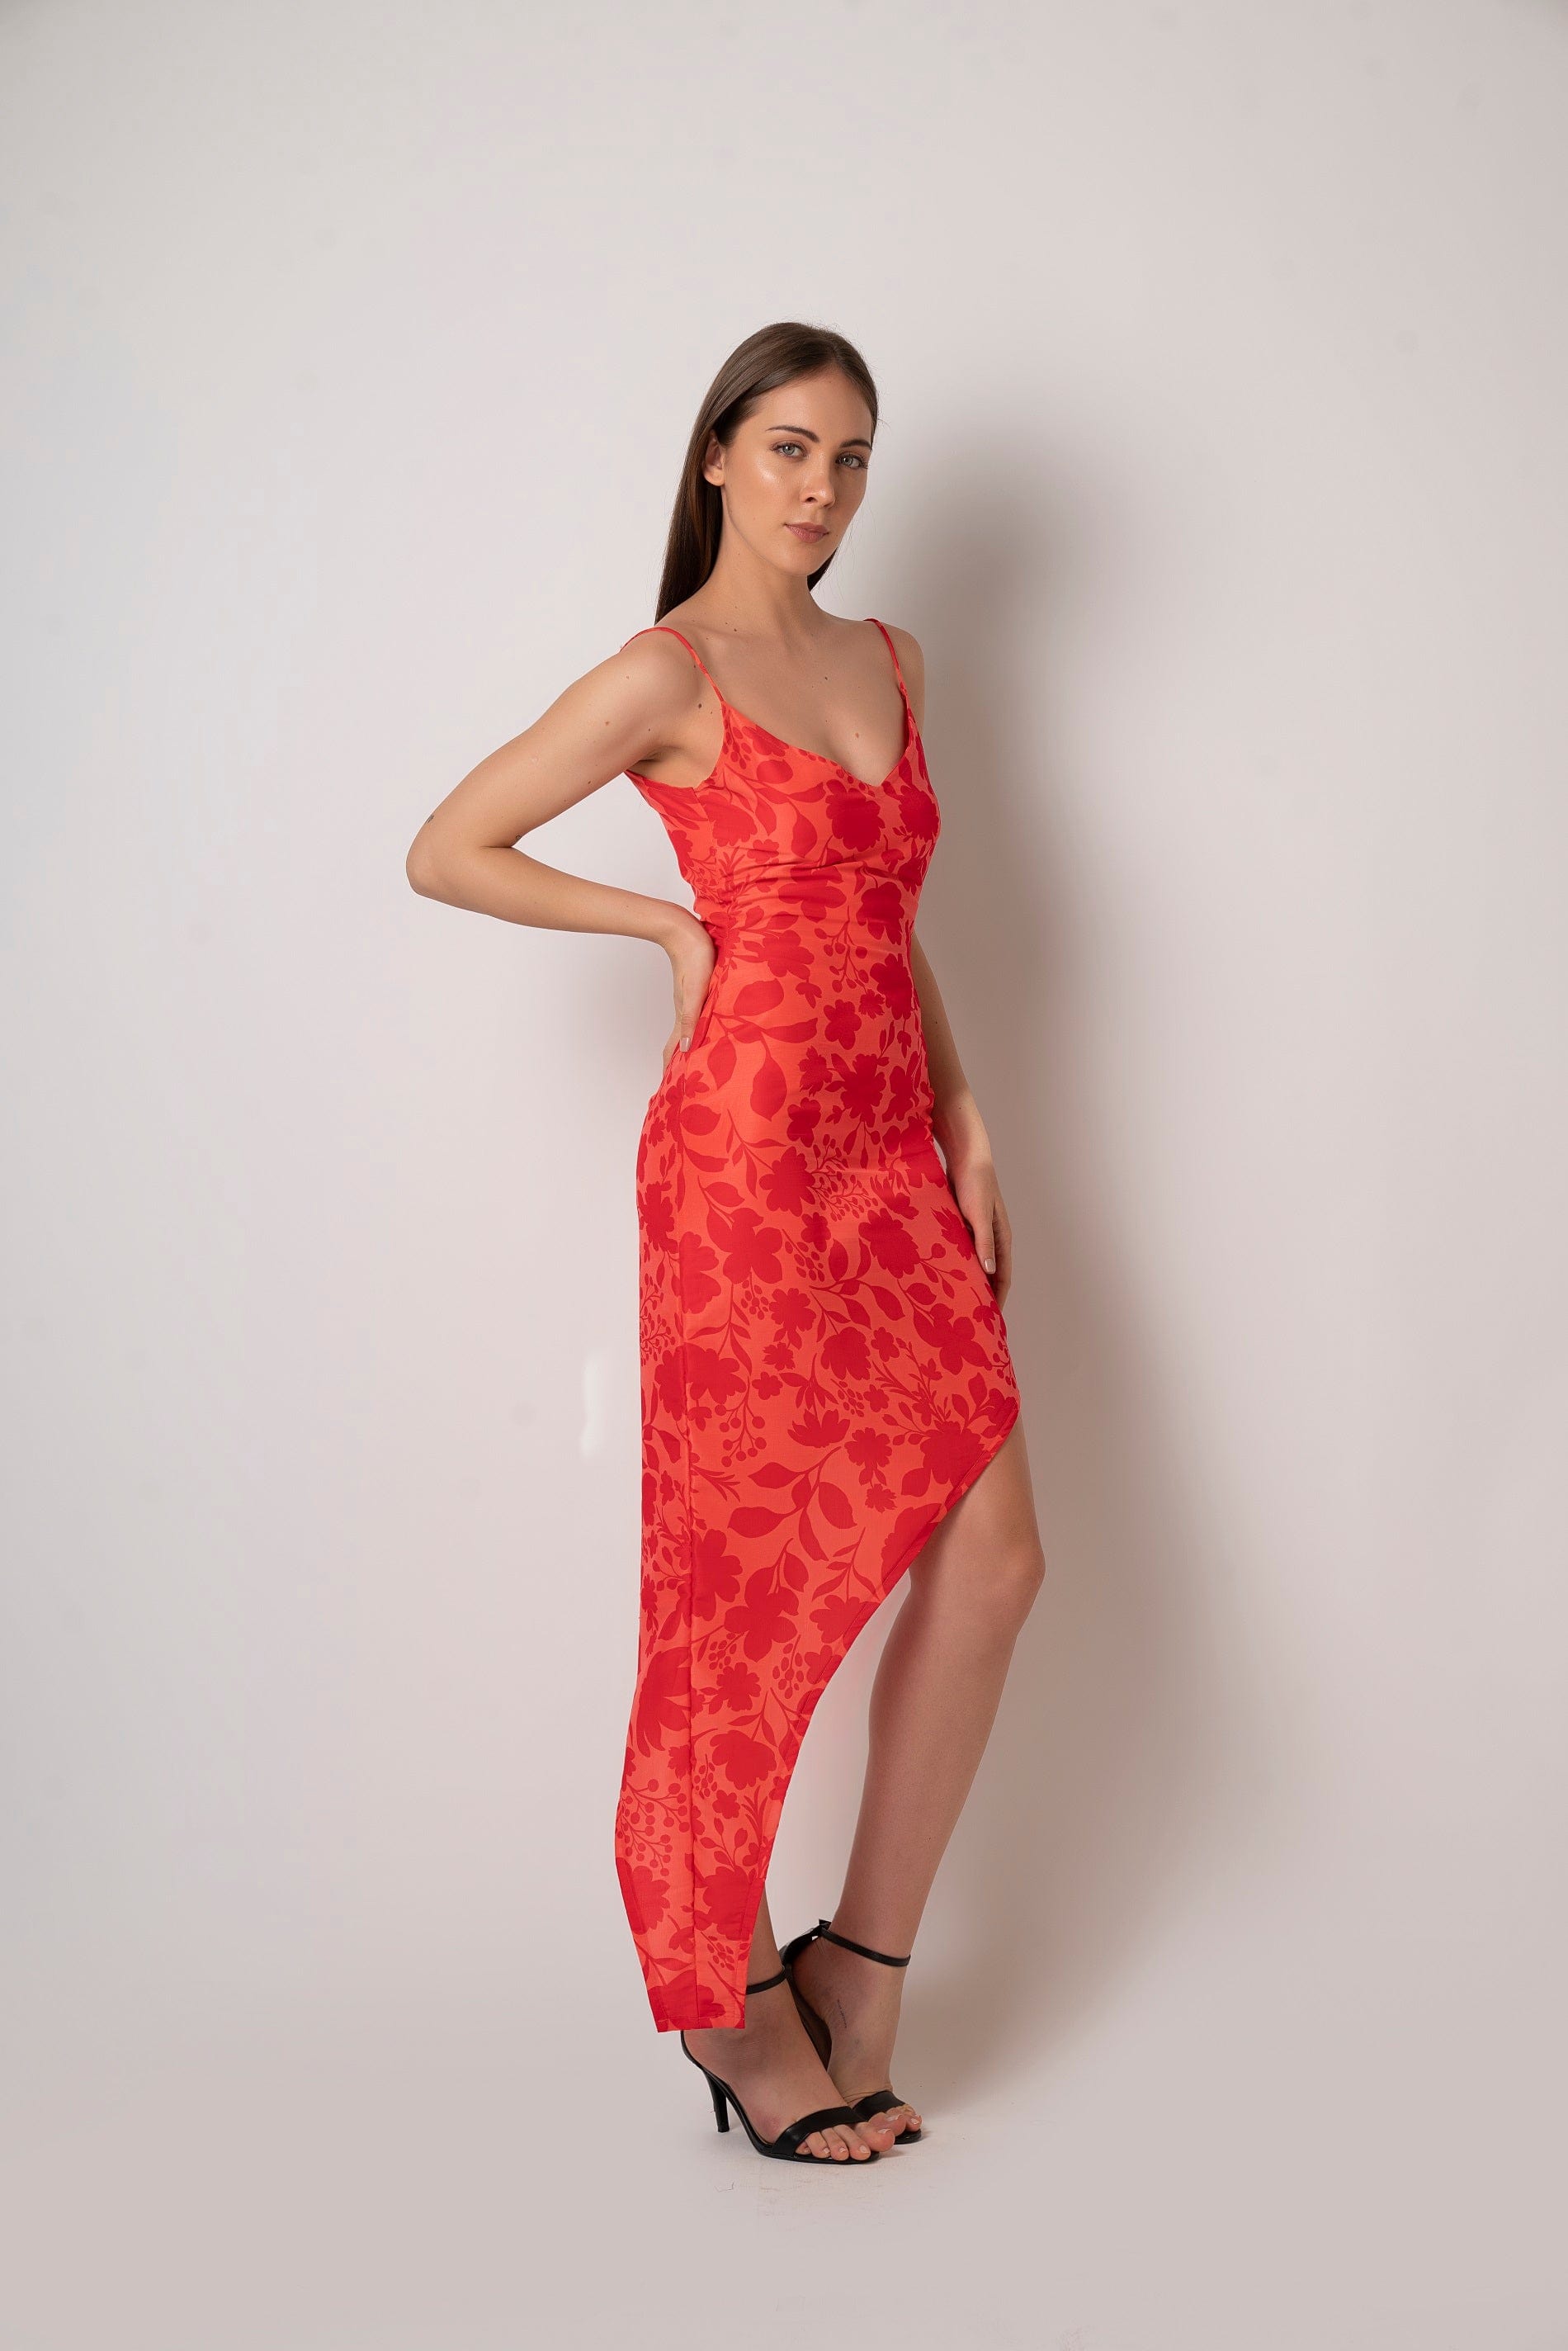 Crafted from breathable muslin fabric, this floral printed dress is light and airy. It features spaghetti straps and a high low cut  making it an ideal summer dress or a beach vacation dress